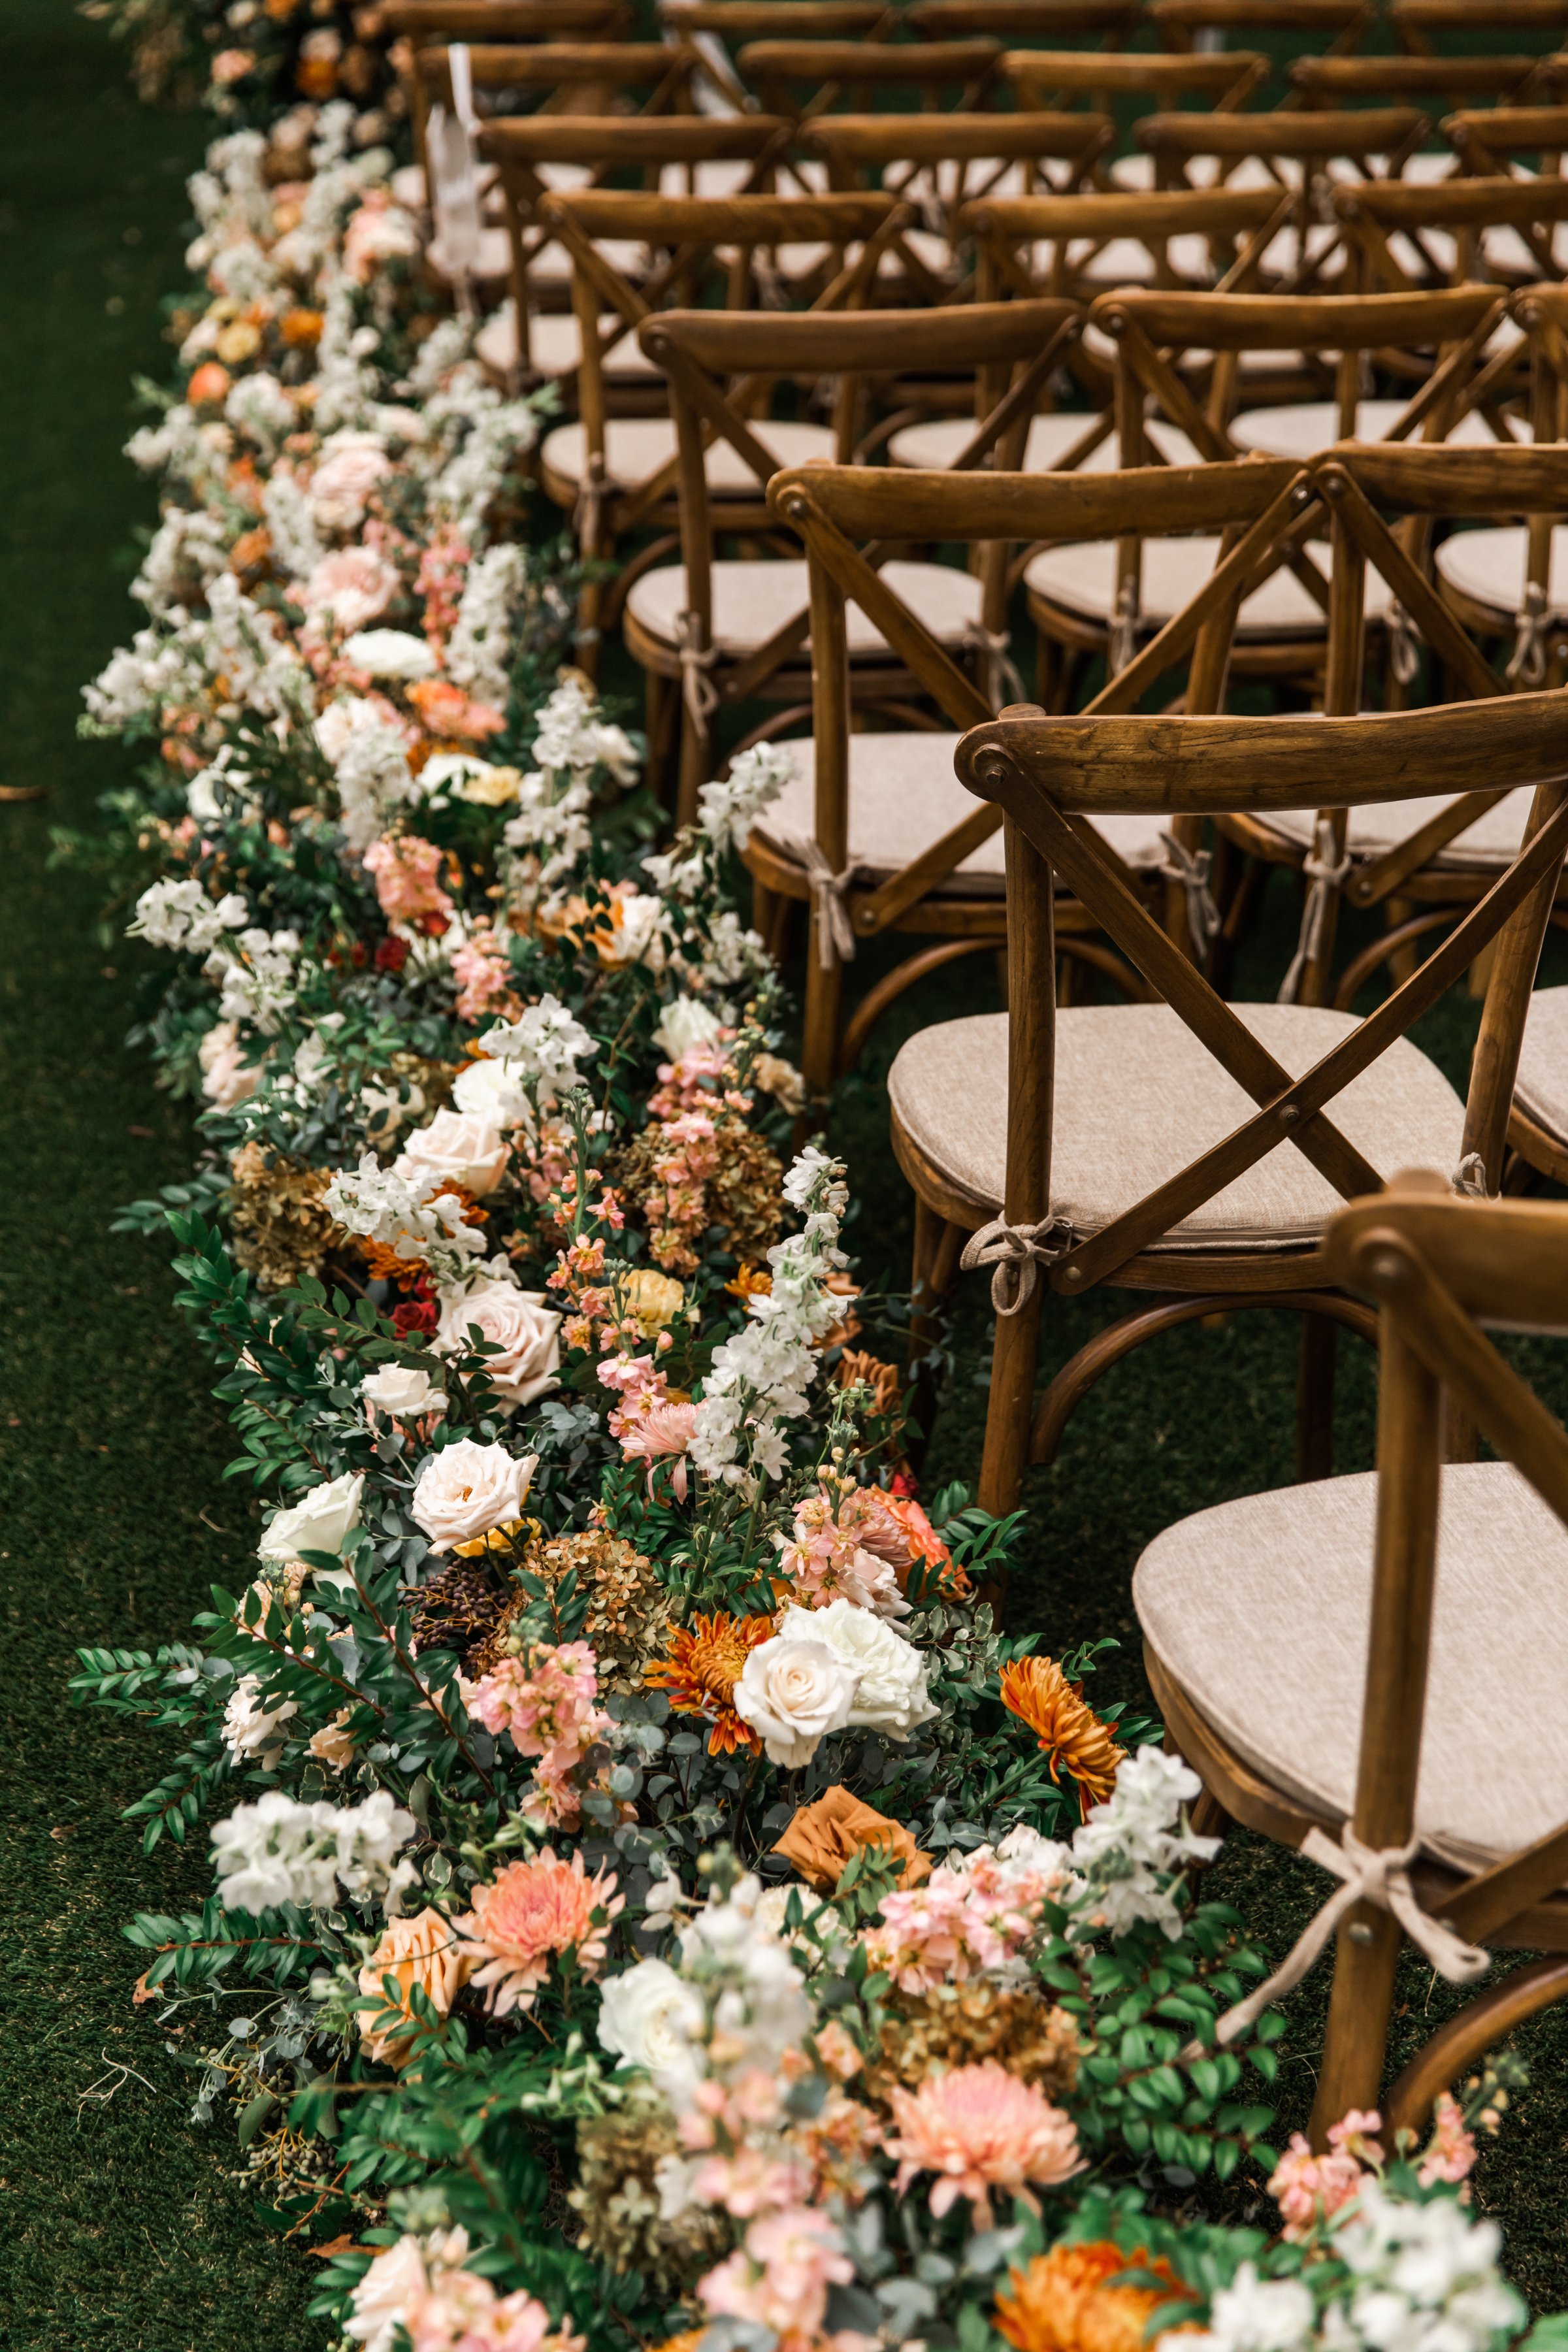 Lush floral hedges create aisle meadows for this fall wedding. Florals feature hues of terra cotta, blush, yellow, copper, and neutrals. Beautiful garden roses, dahlias, and fall florals highlight these arrangements. Design by Rosemary and Finch in N